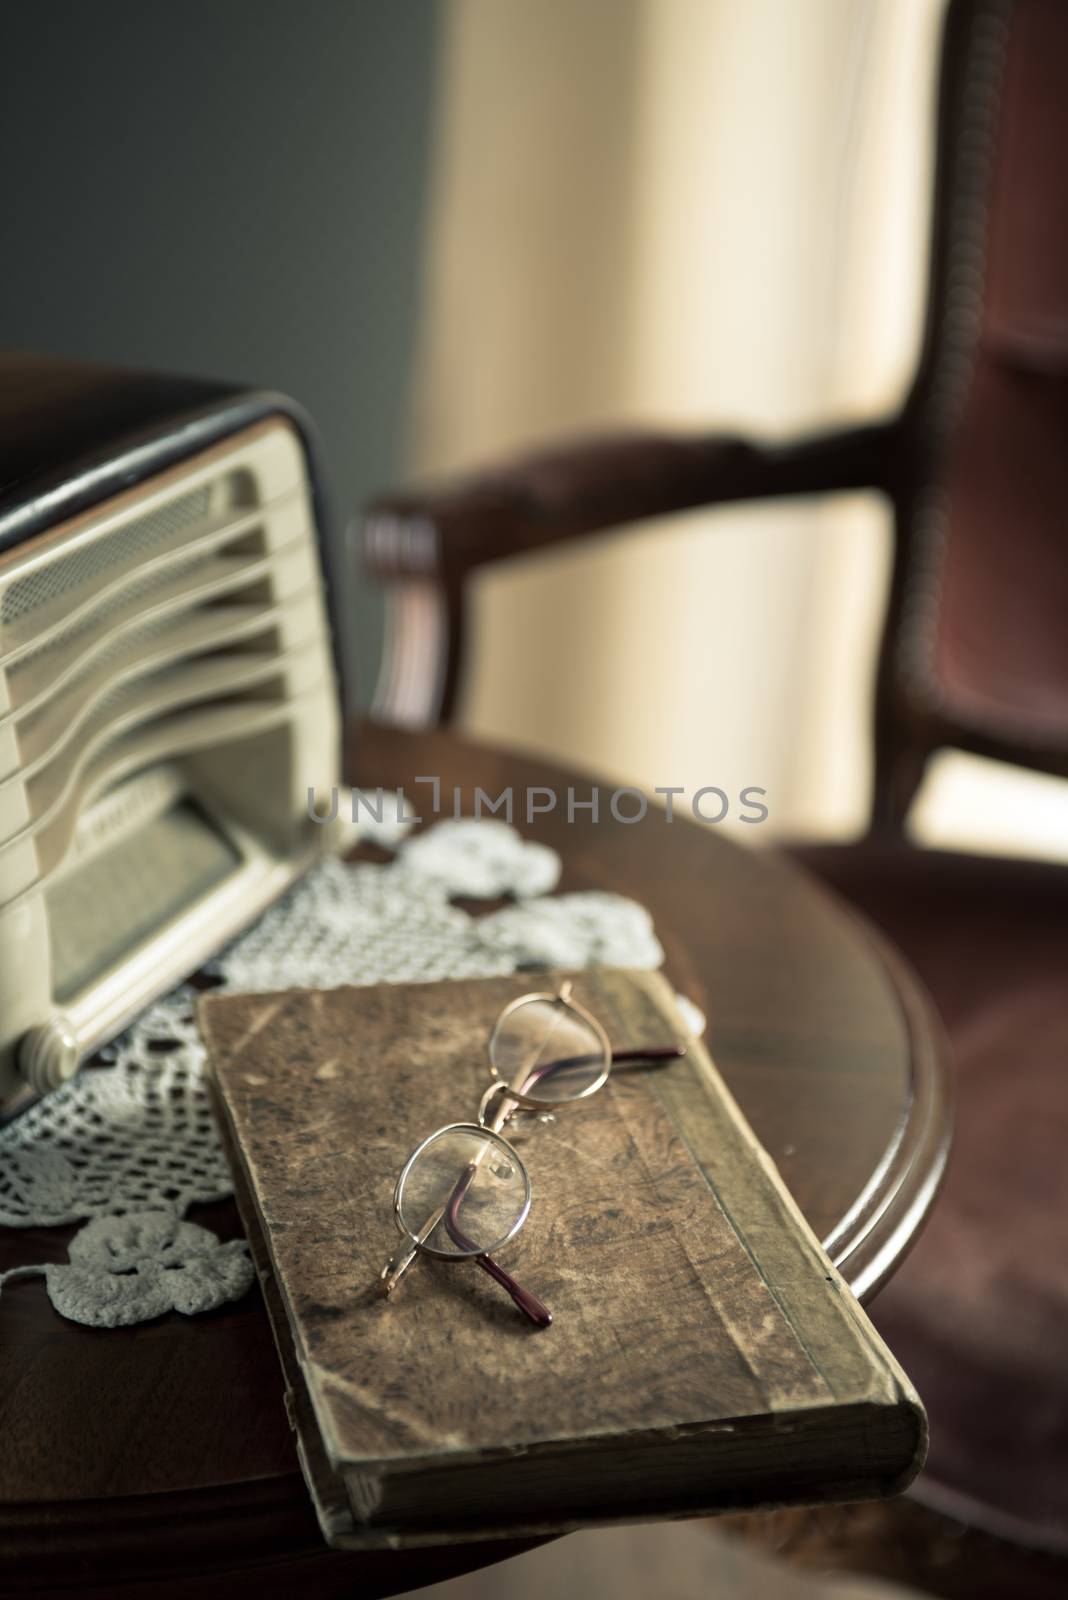 Vintage home interior with old radio and book on round wooden table.